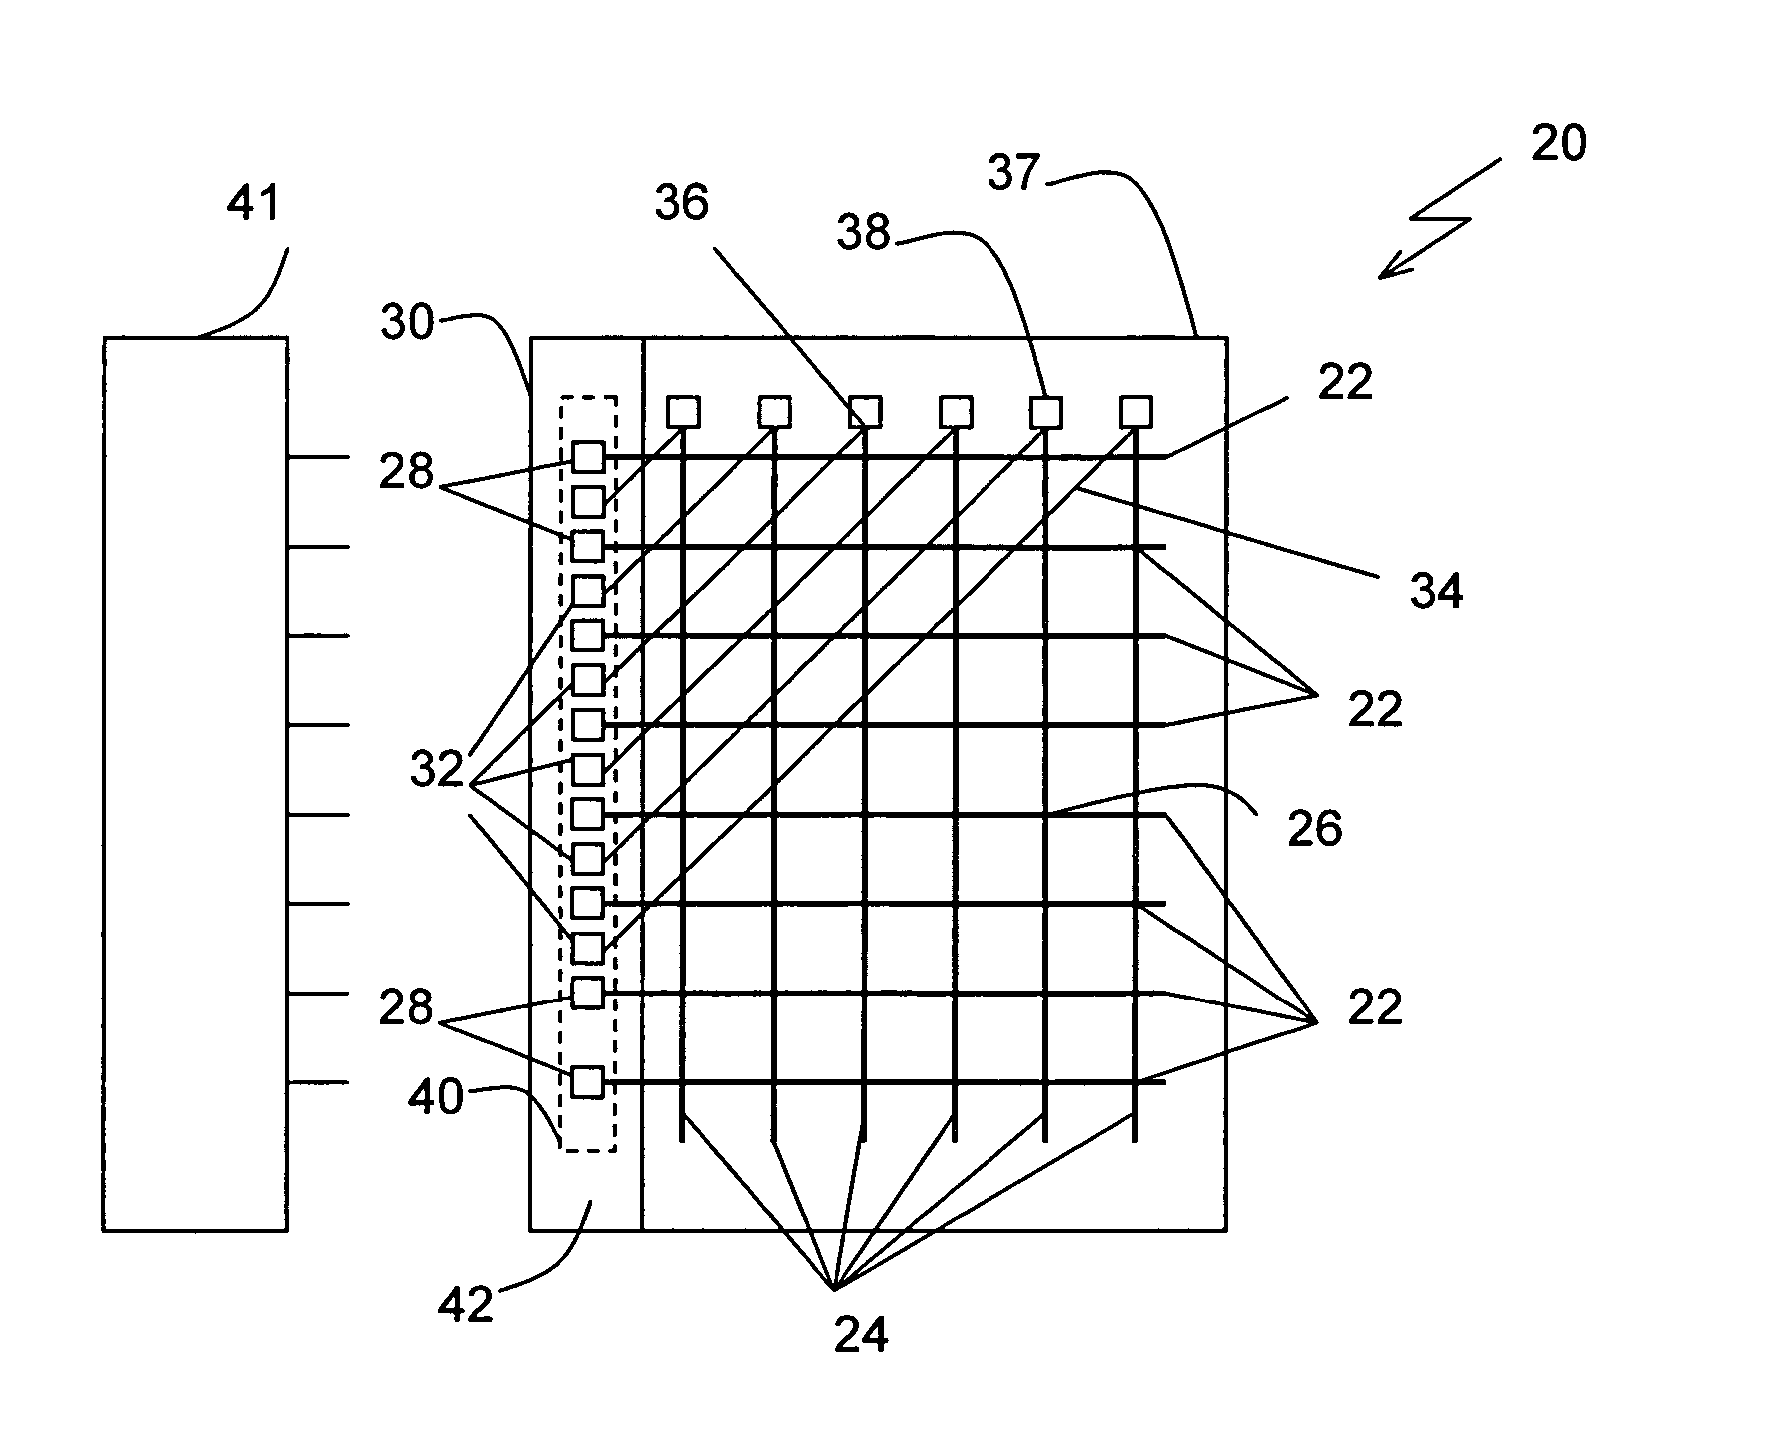 Electro-optic displays with single edge addressing and removable driver circuitry